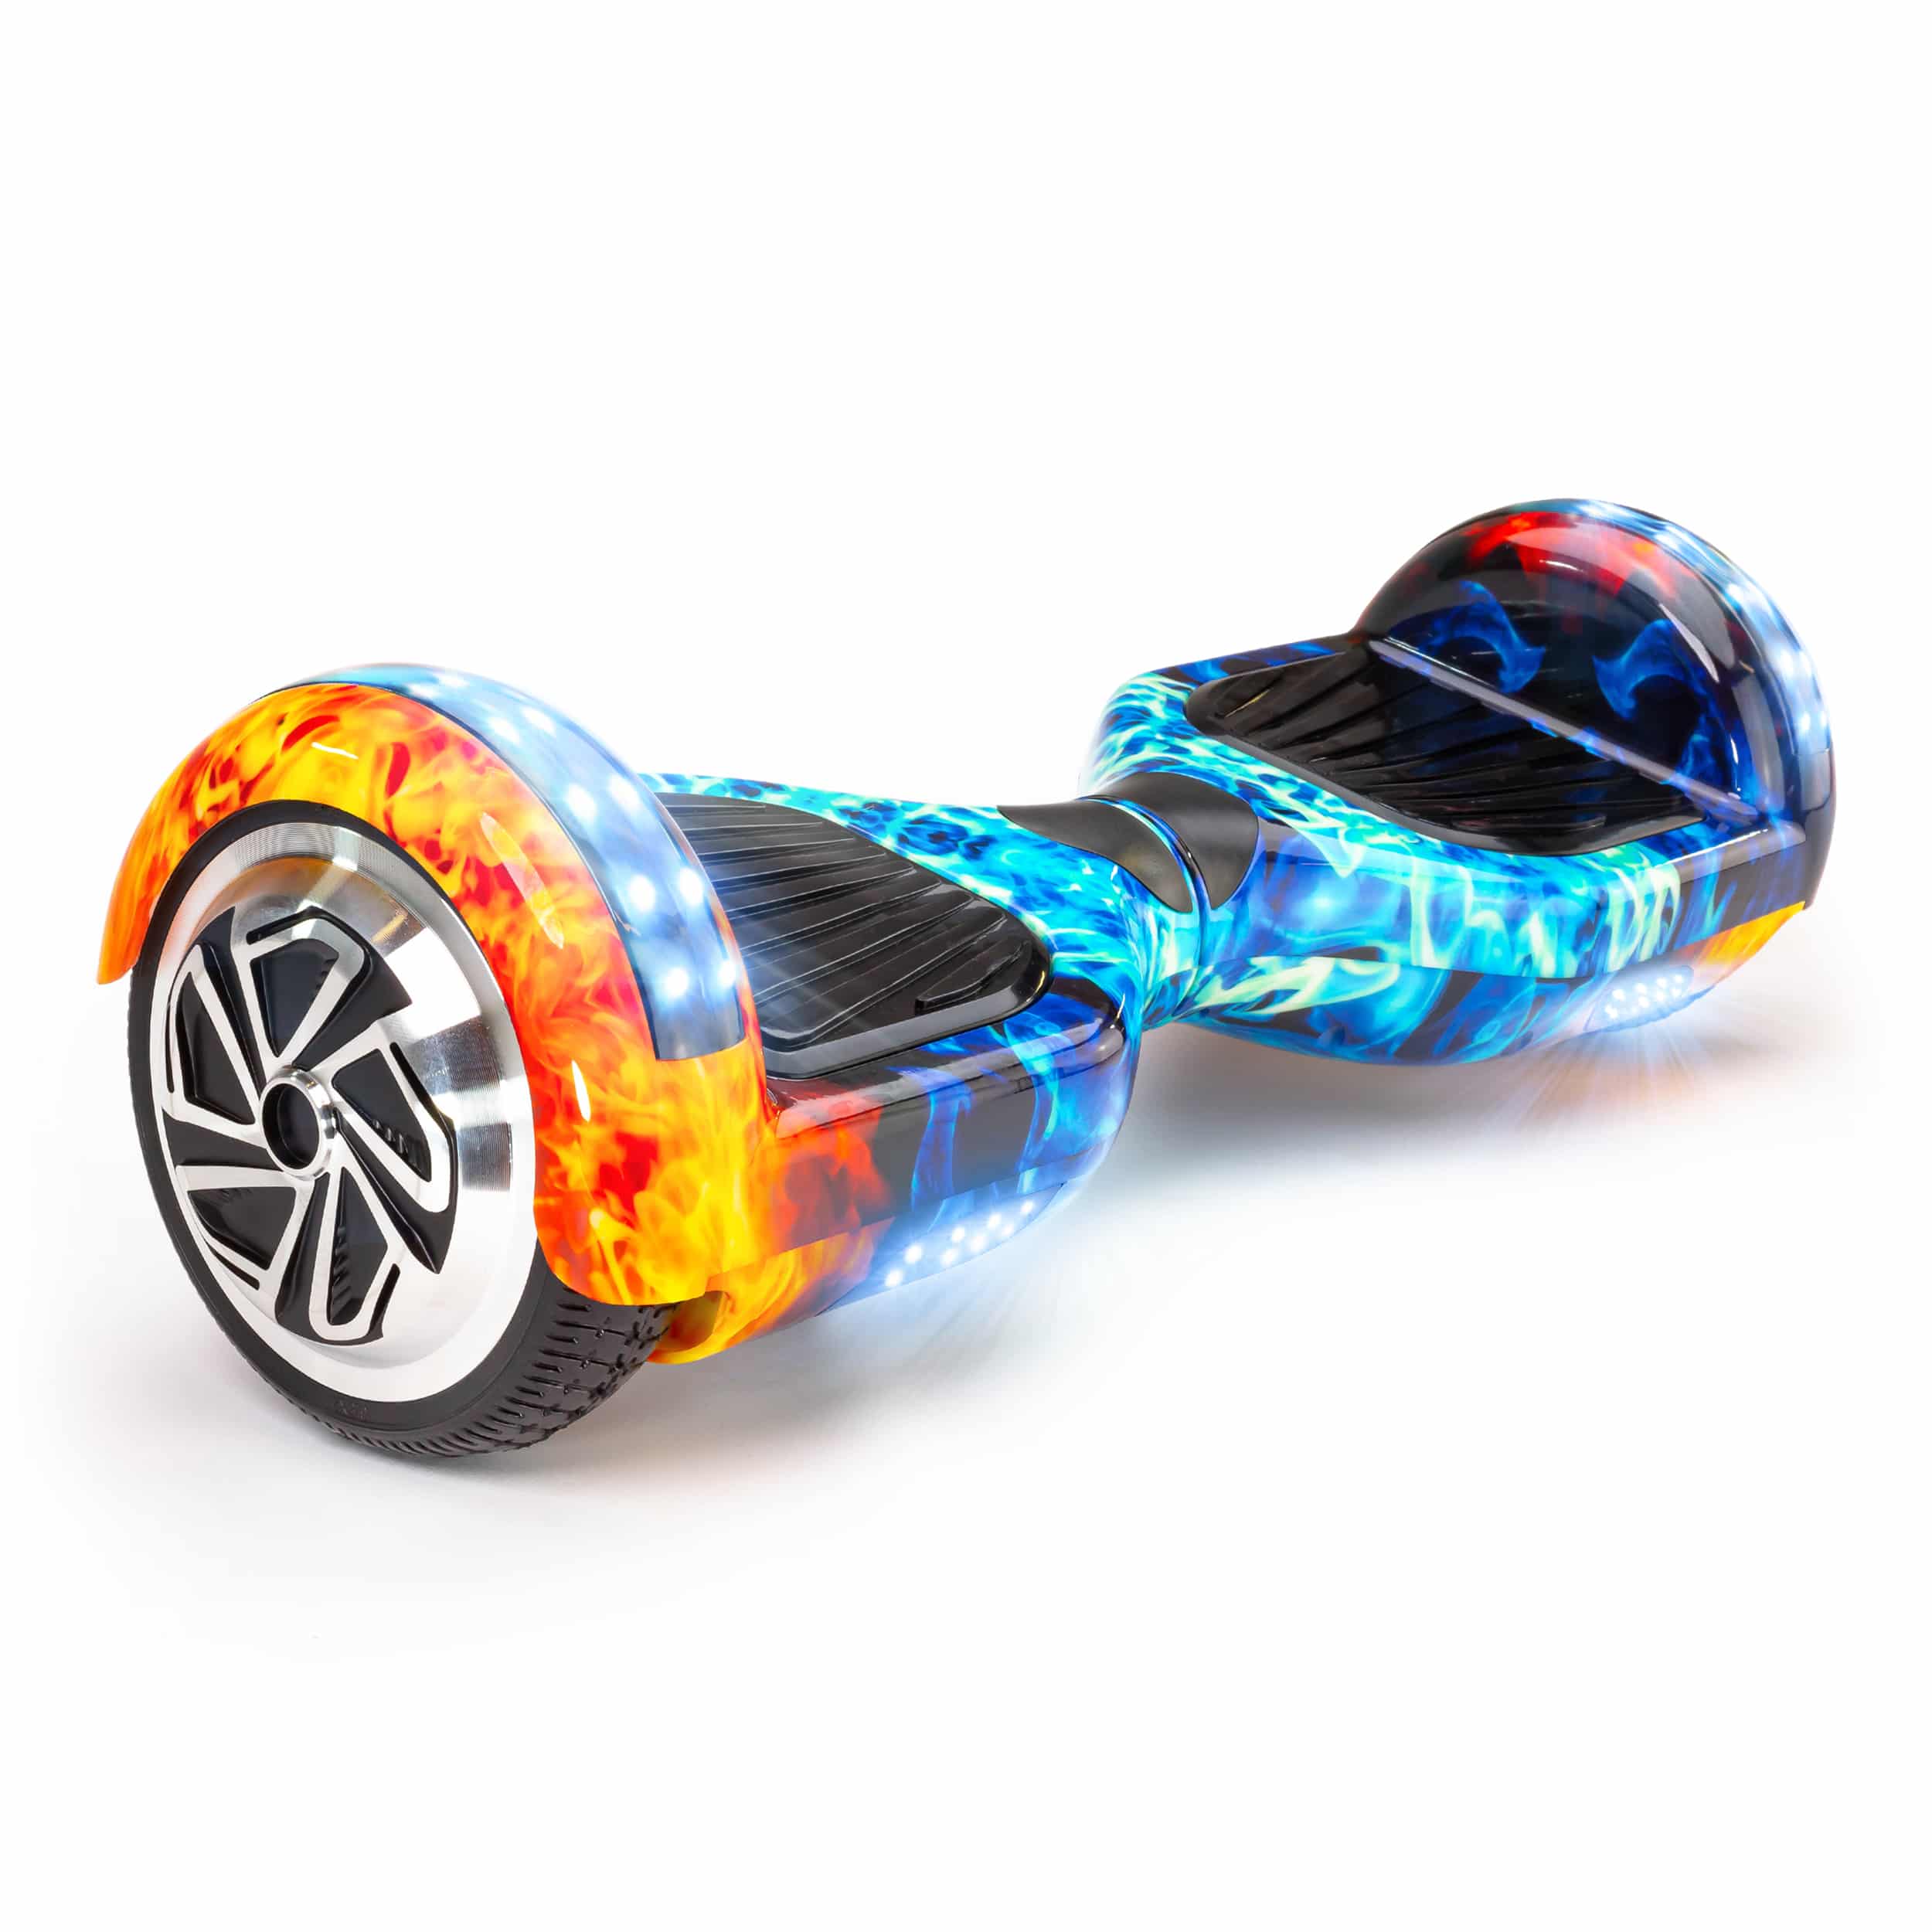 Fire & Ice X6 Hoverboard